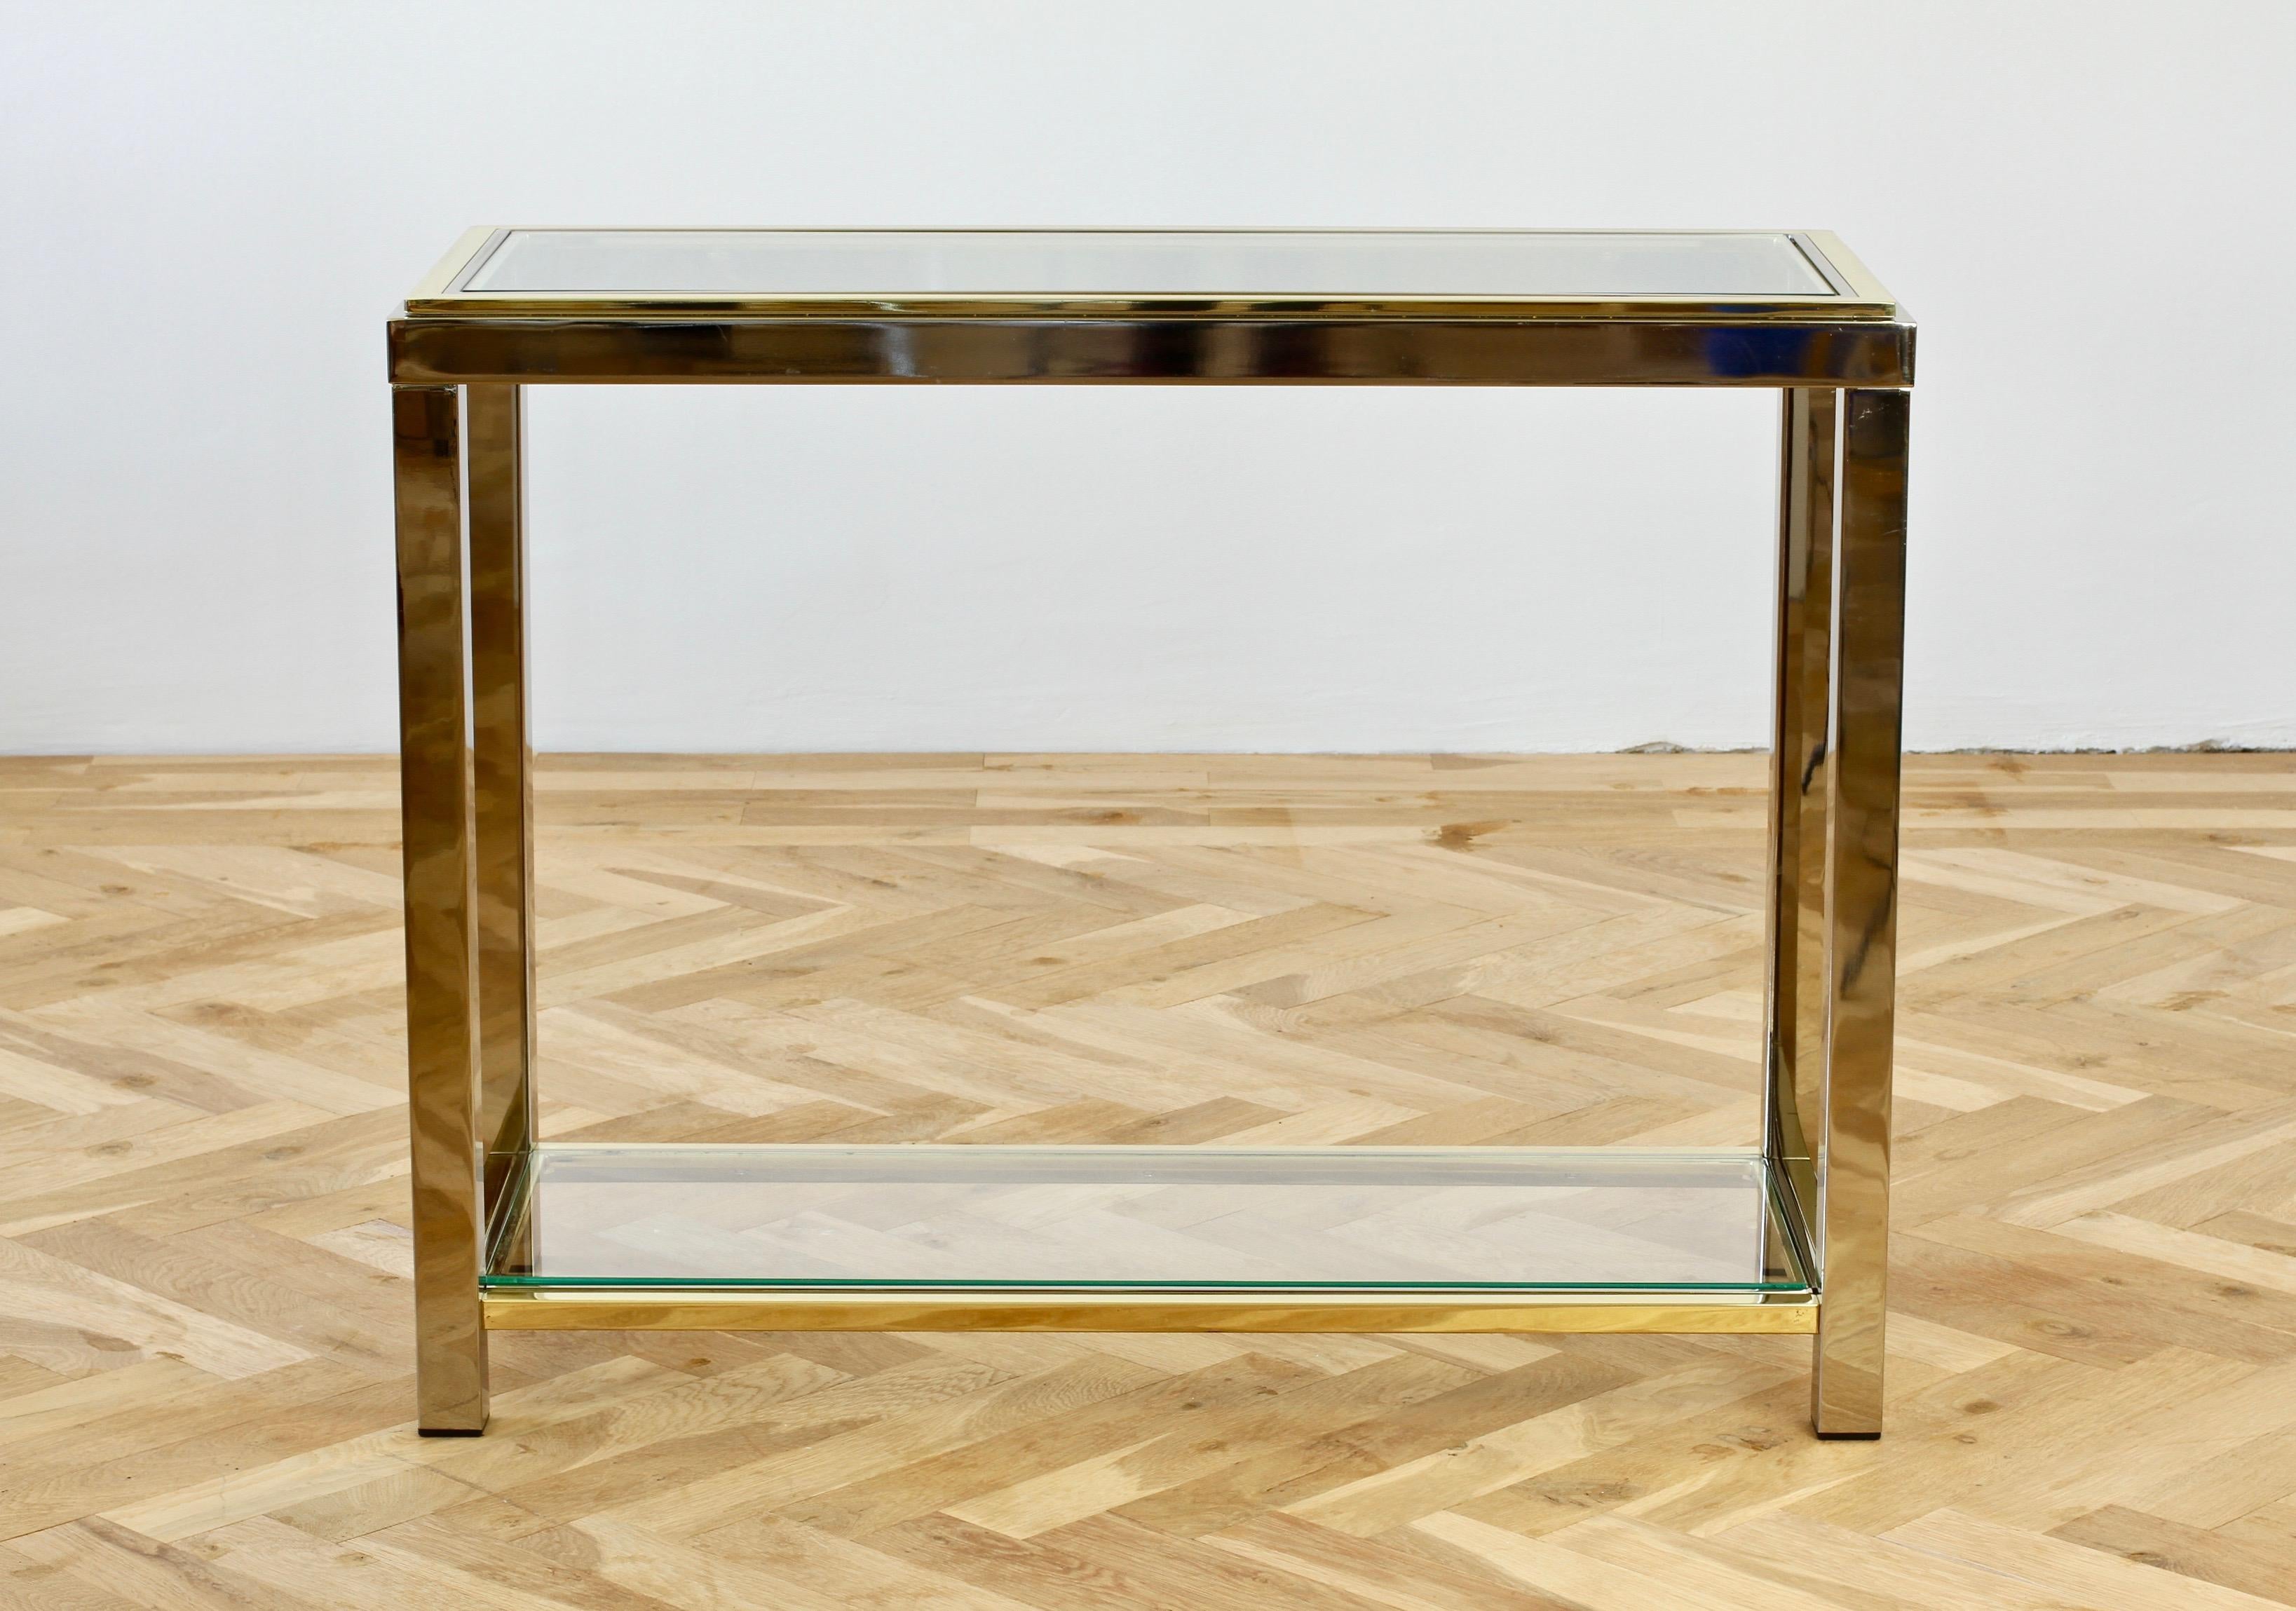 Brass and chrome-plated two-tiered console or hallway table, circa 1970s. Perfect for the Hollywood Regency style enthusiast or mid-century lover although, this table would sit very well indeed within any contemporary home decor design.

Not